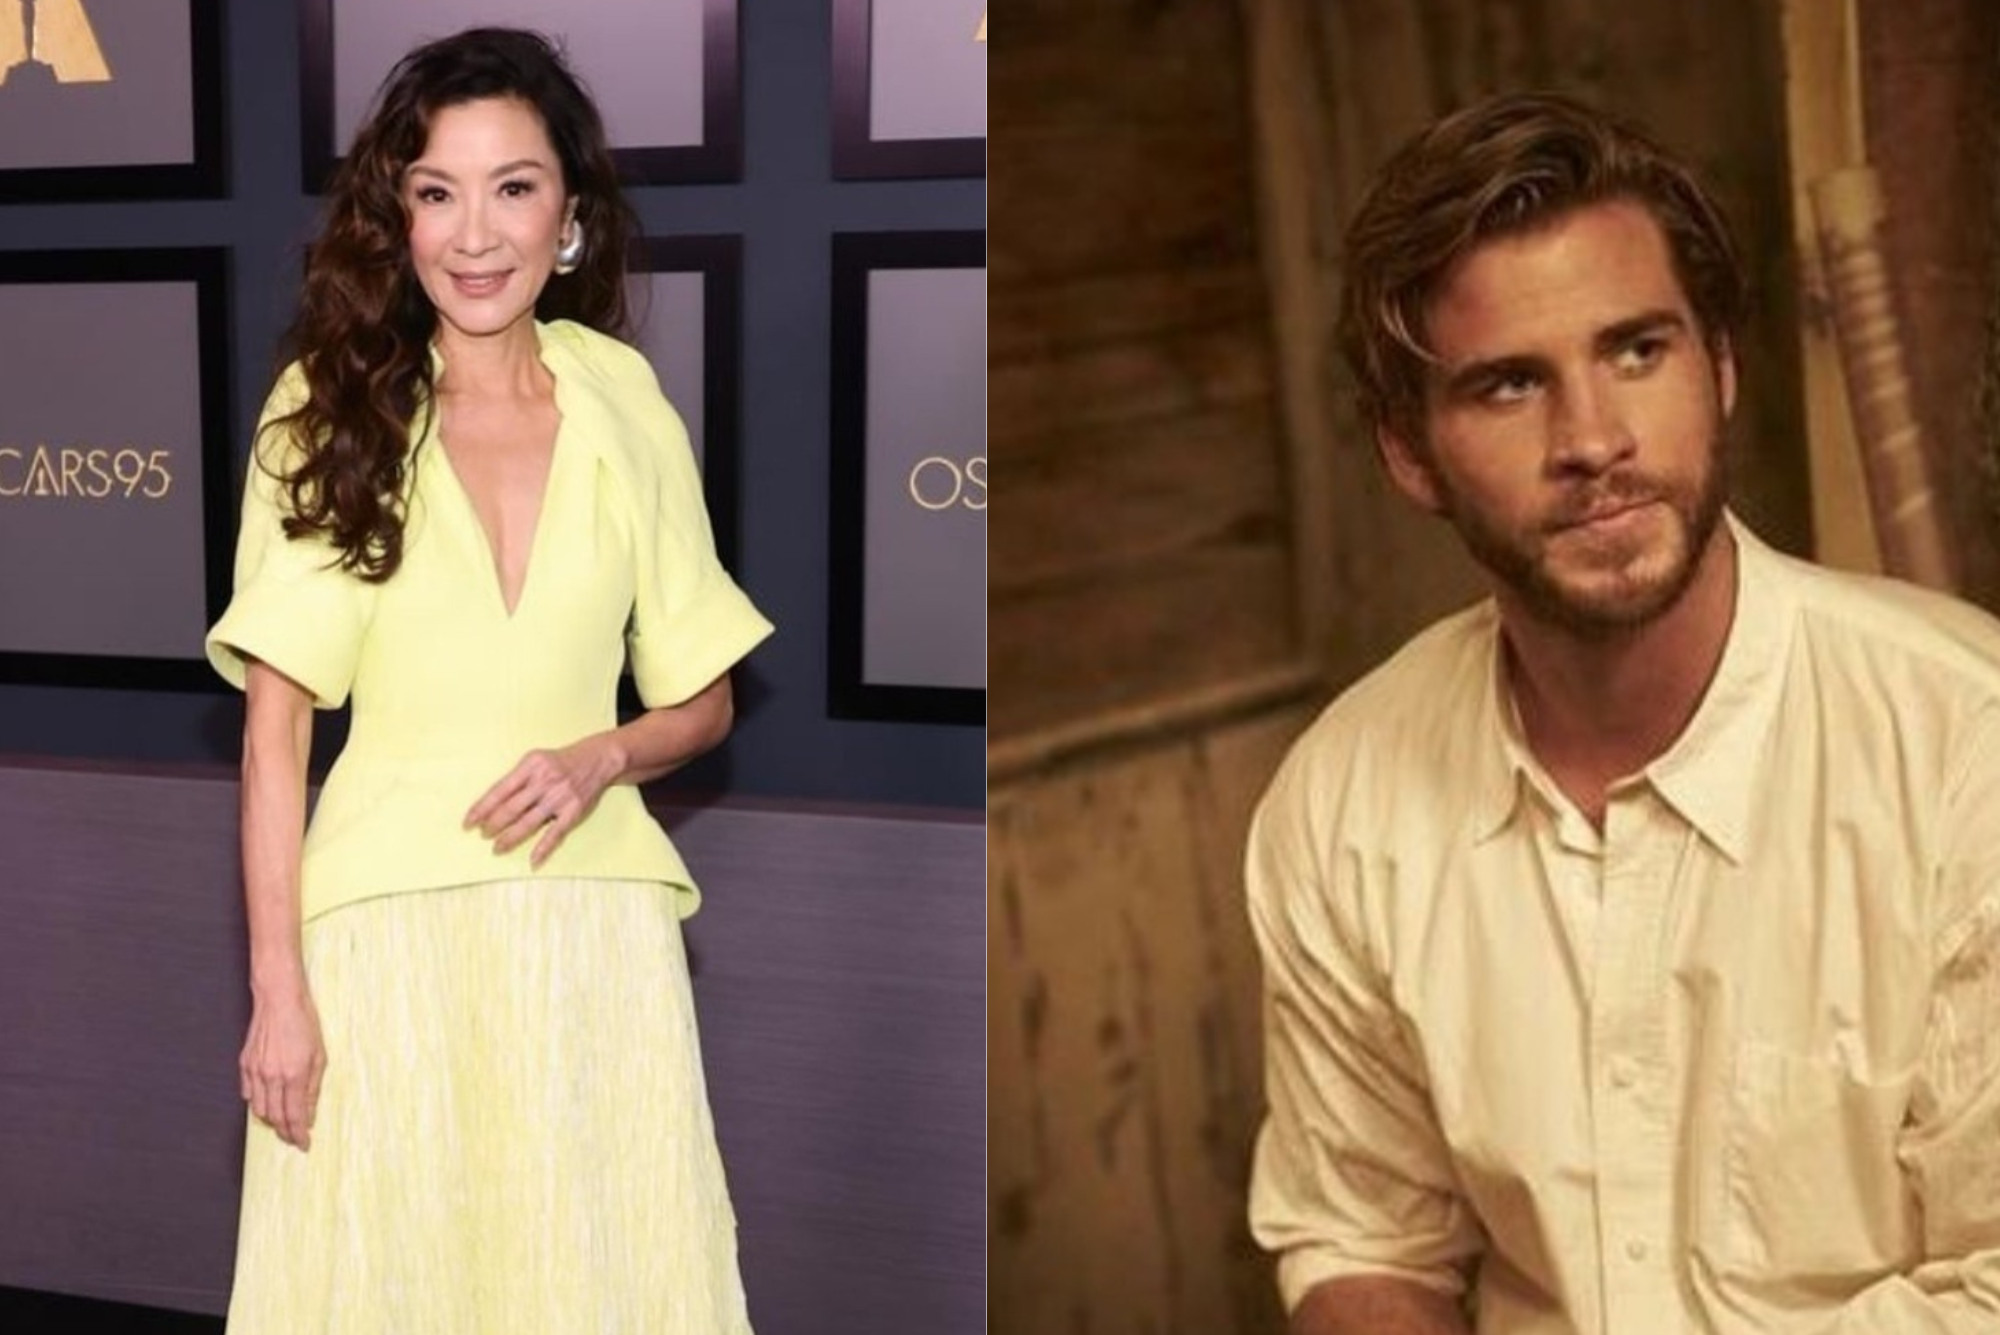 ‘Let’s see what he brings’ – ‘The Witcher: Blood Origin”s Michelle Yeoh is still unsure about Liam Hemsworth after Henry Cavill left the show

+2023